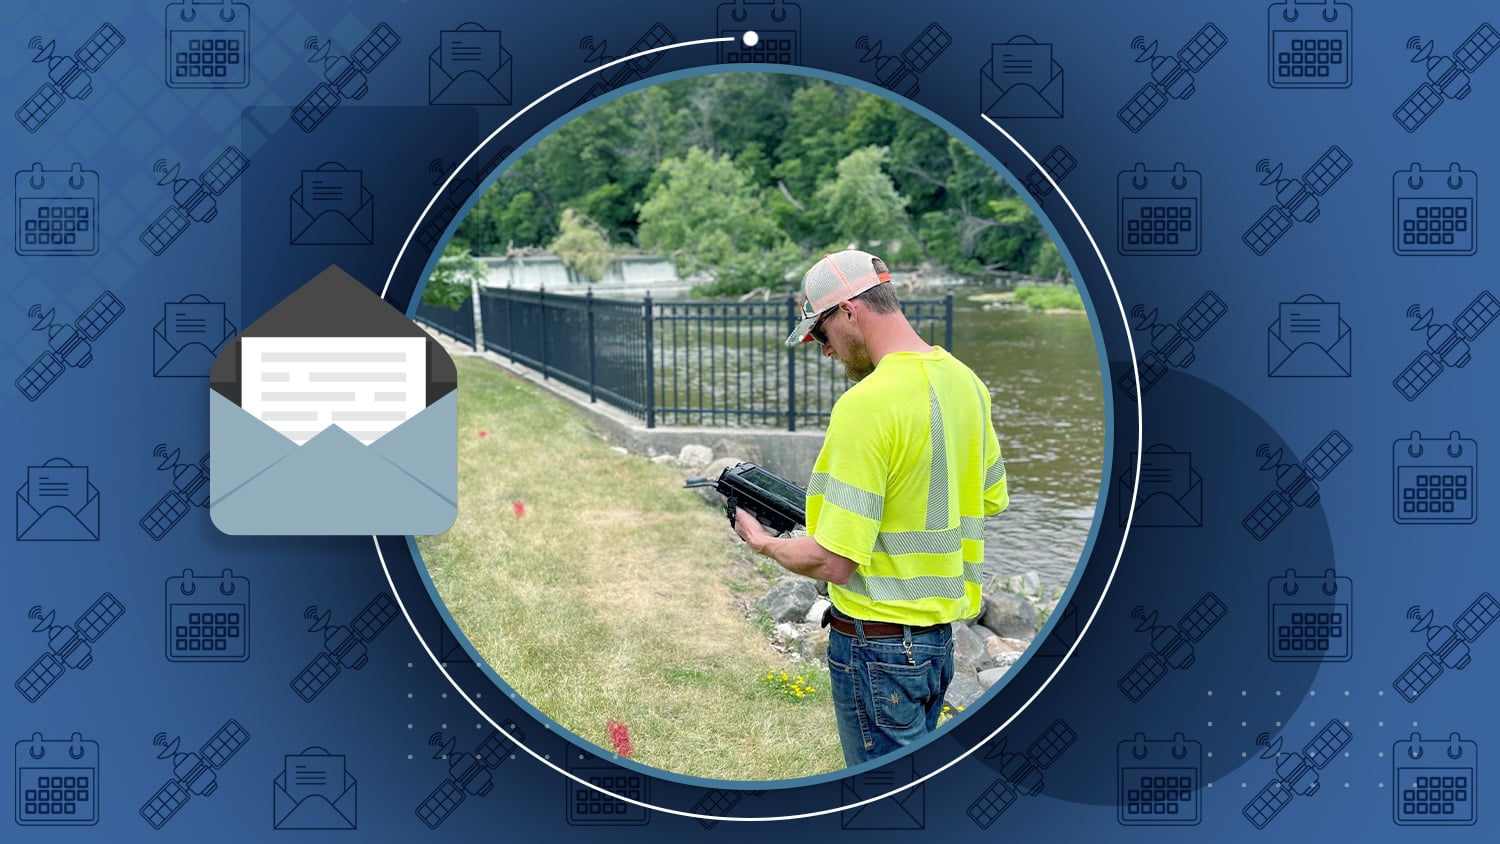 Eos Positioning Systems February 2023 Newsletter - Sheboygan Falls Utilities Simplifies Asset Management and Data Collection